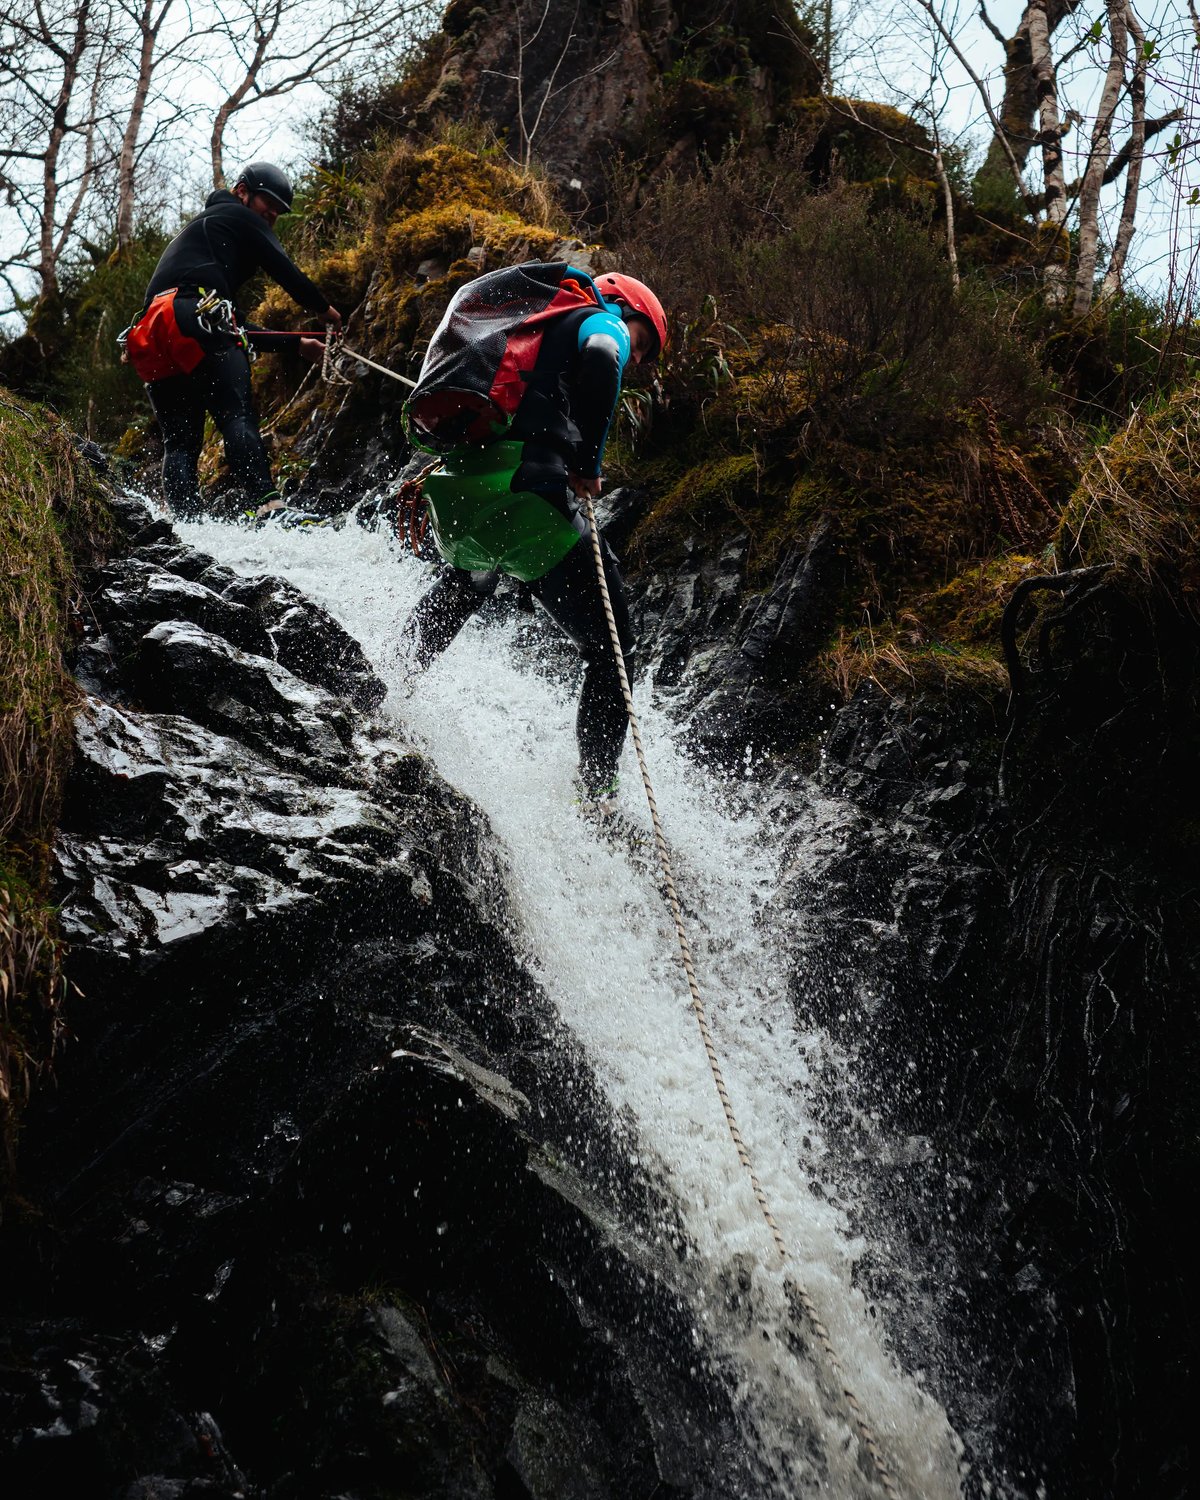 Their gift voucher redeemed, recipient enjoyes abseilng waterfall action on canyoning in Scotland experience